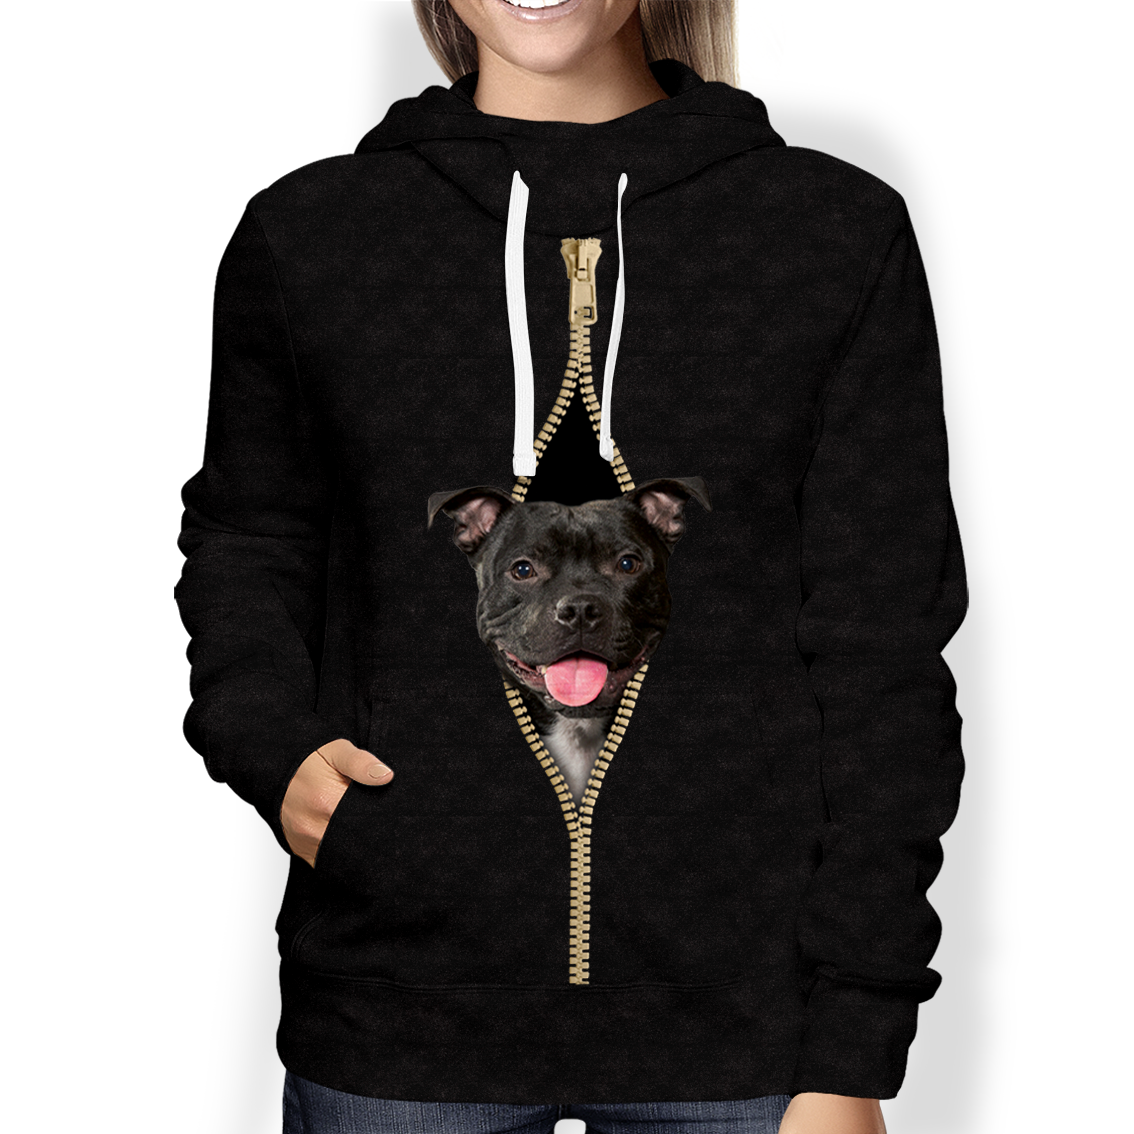 I'm With You - American Staffordshire Terrier Hoodie V2